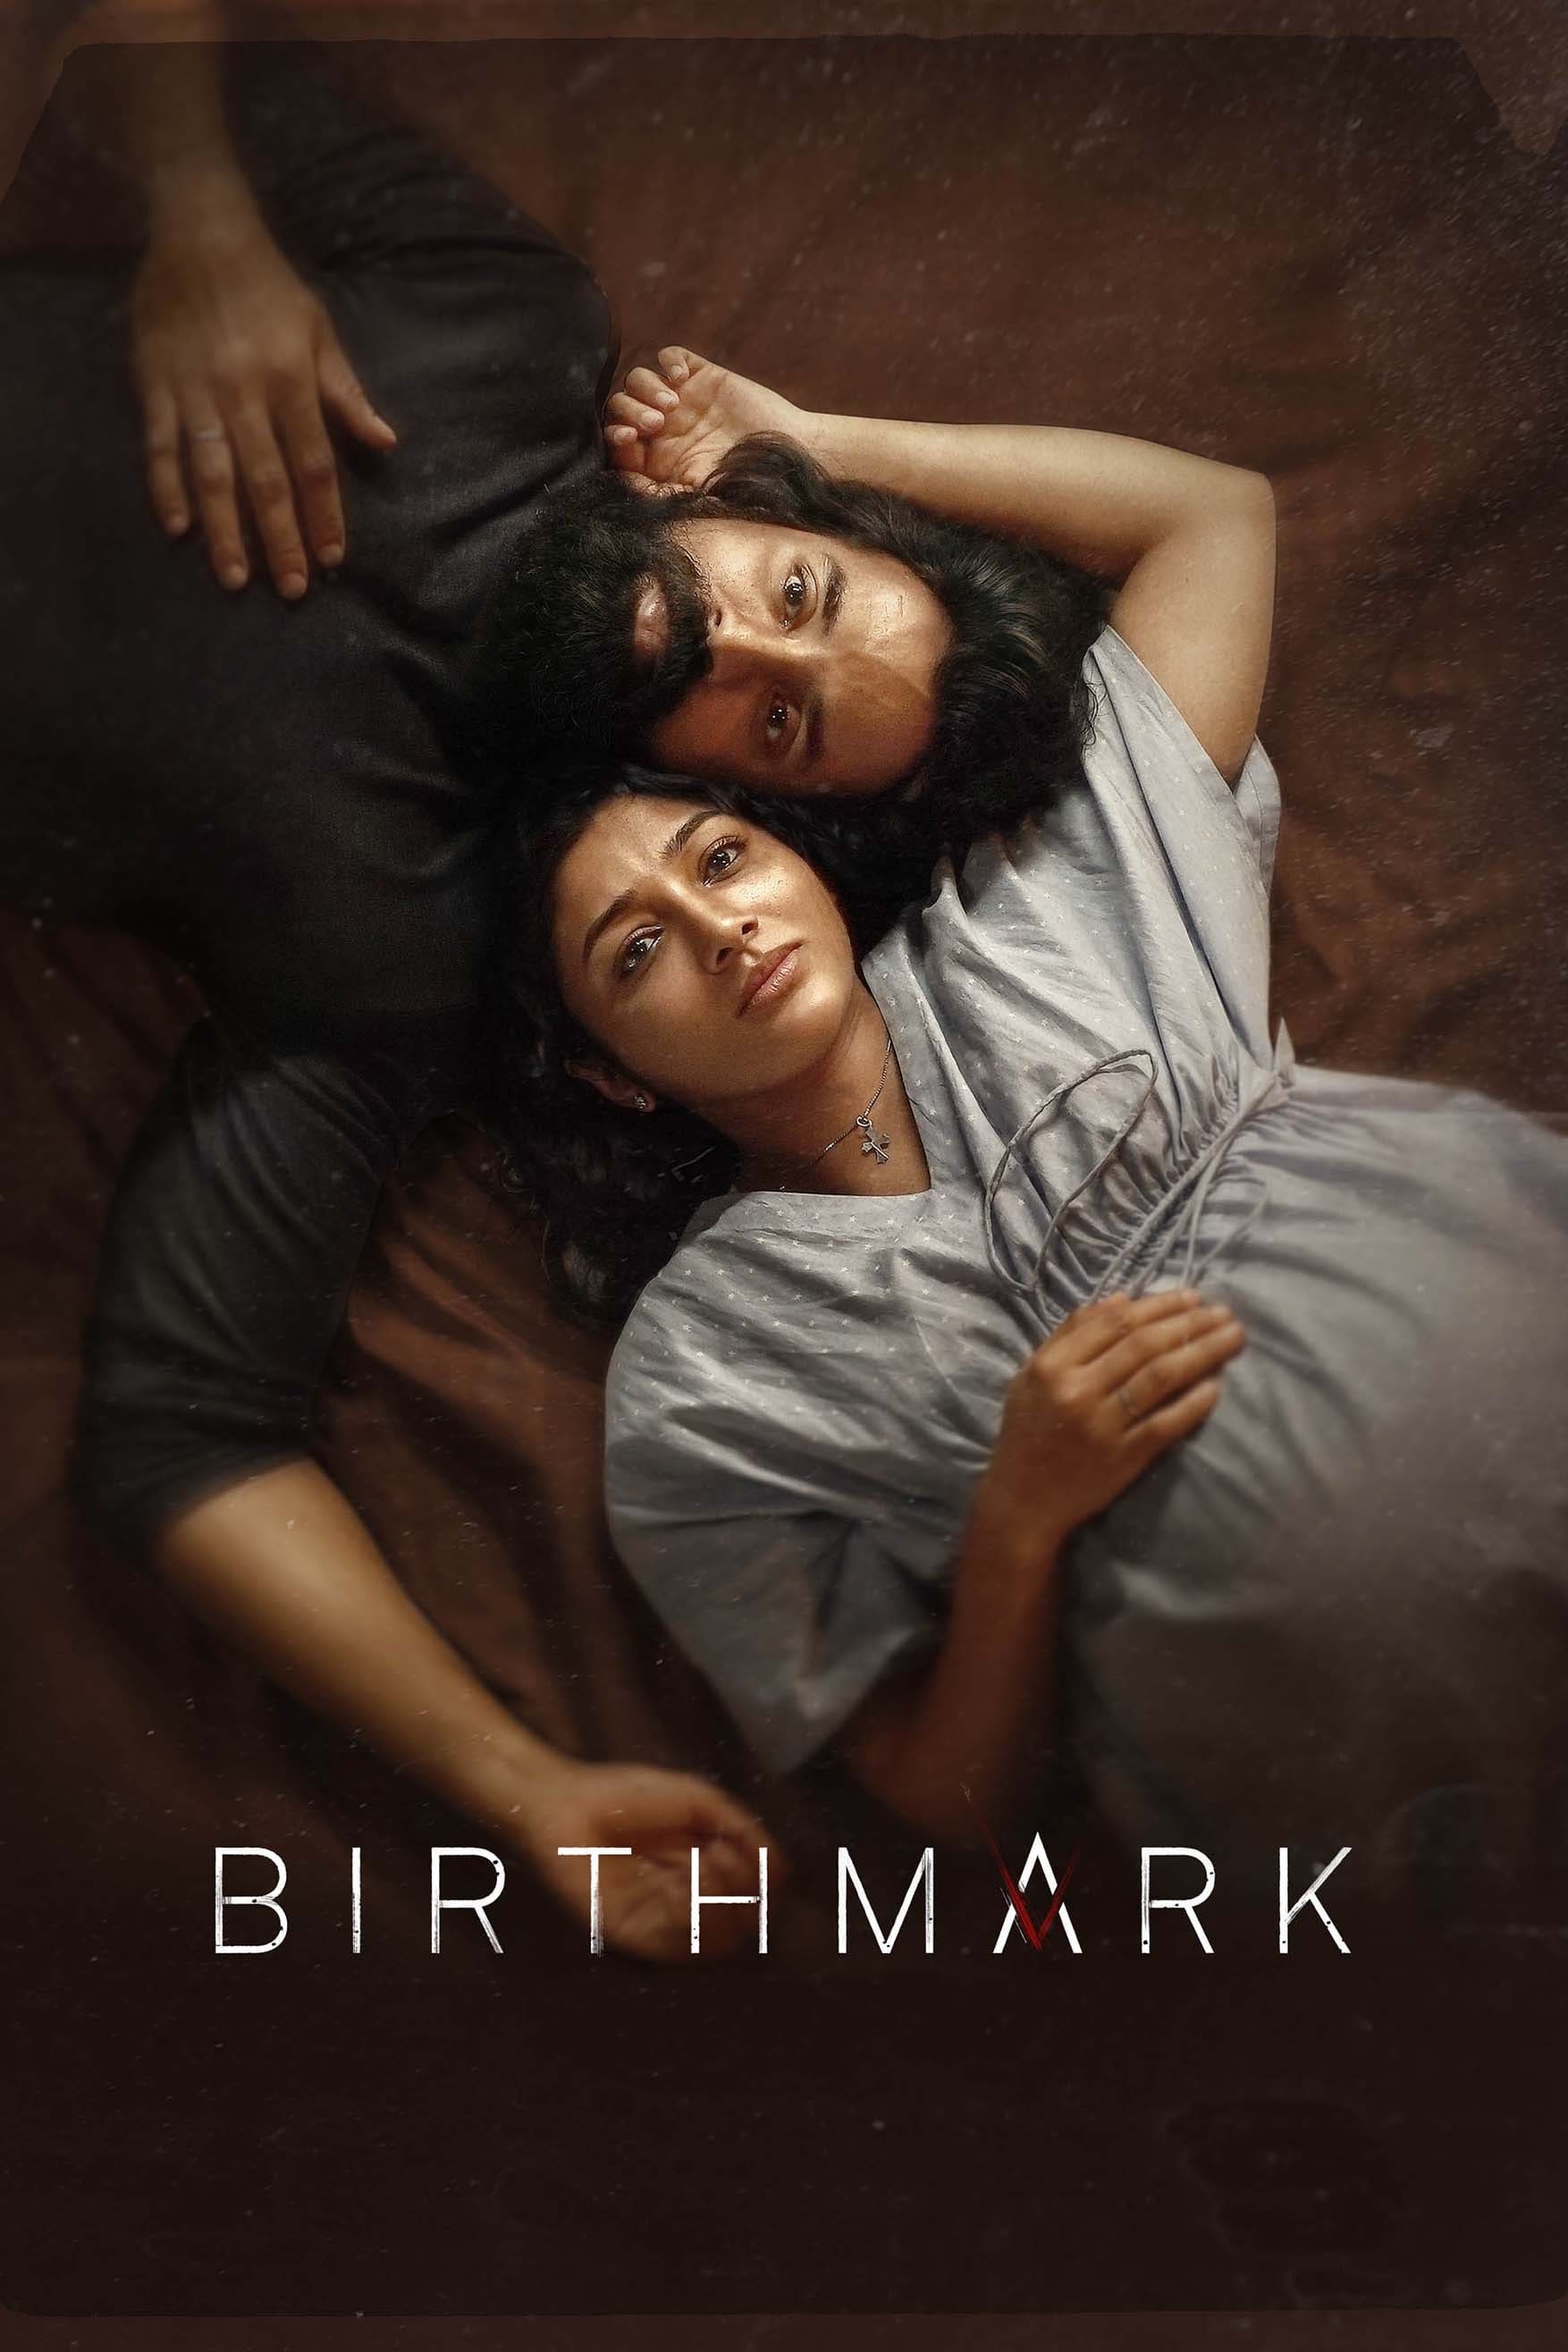 Poster for the movie "Birthmark"